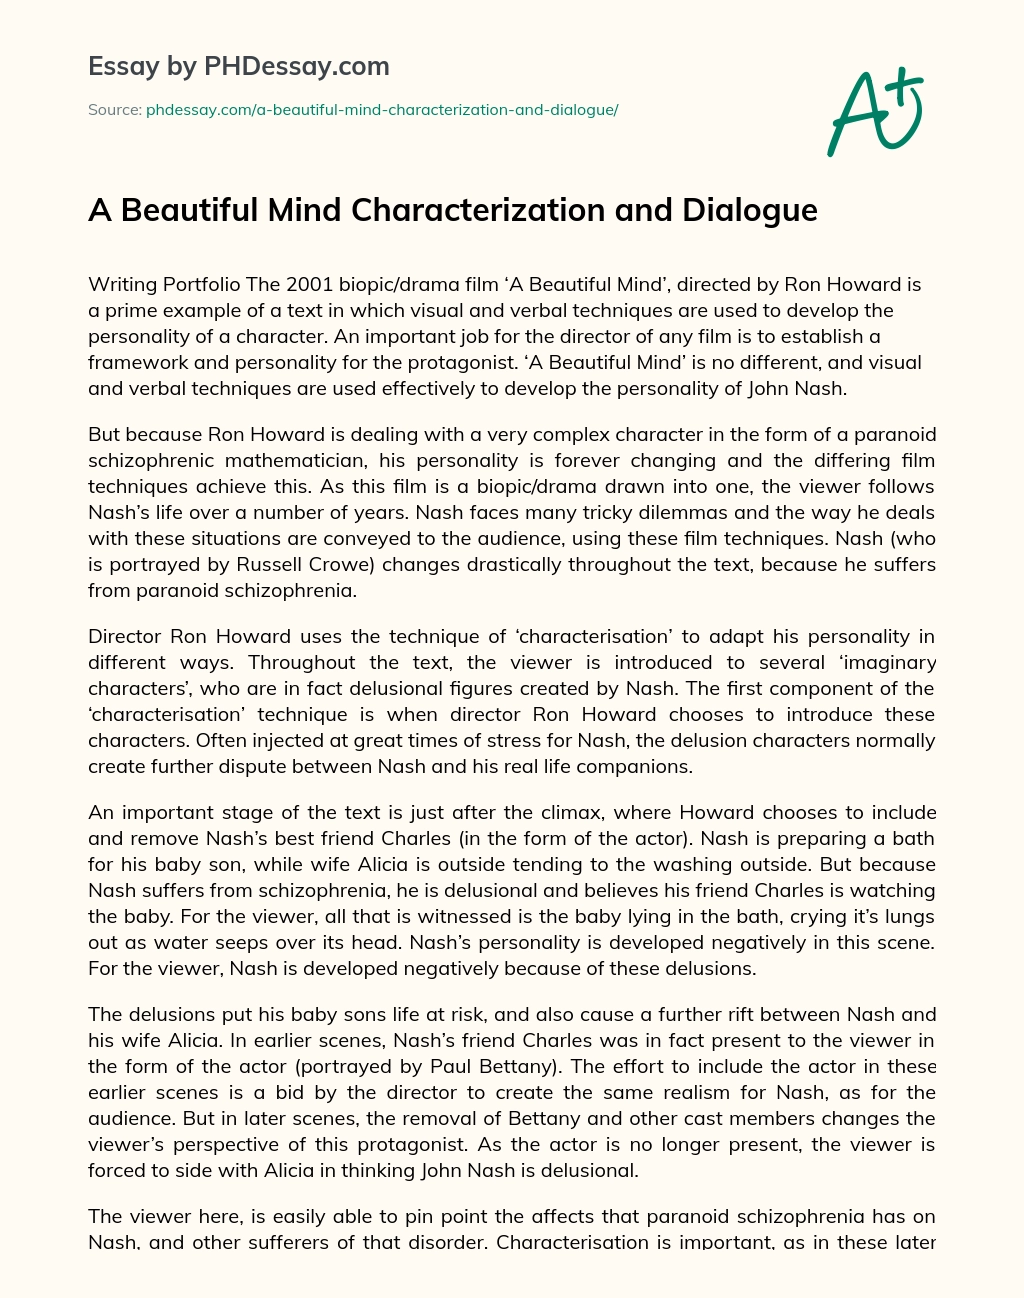 A Beautiful Mind Characterization and Dialogue essay